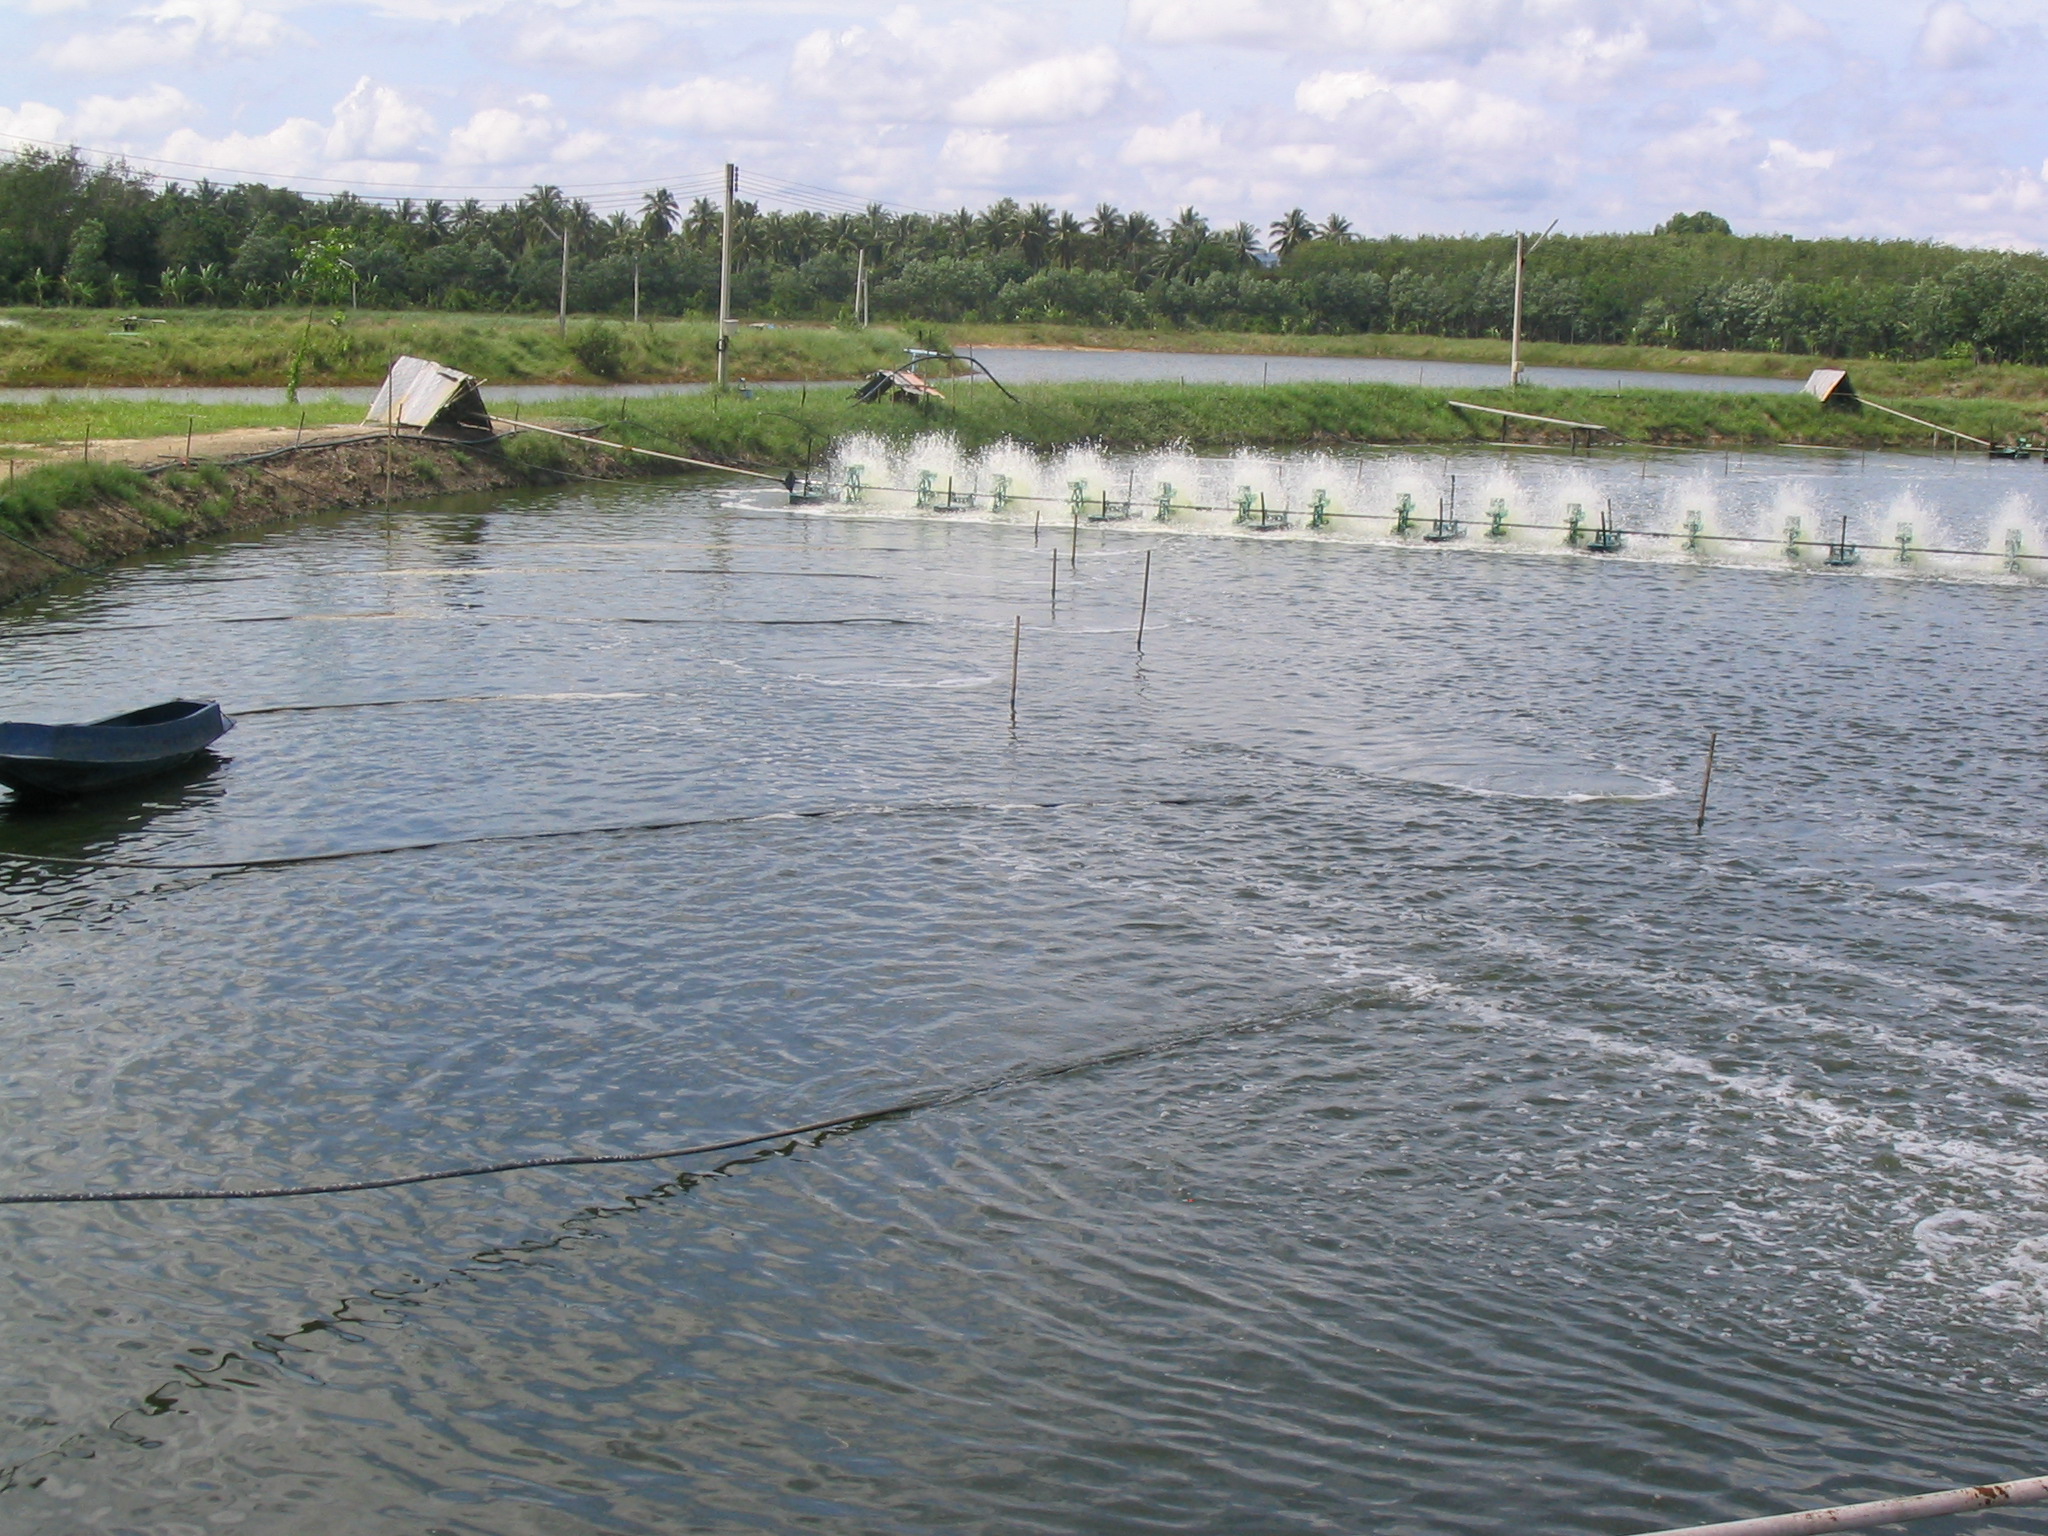 Hai Duong province: Fisheries Association encourages members to practice VietGAP in aquaculture